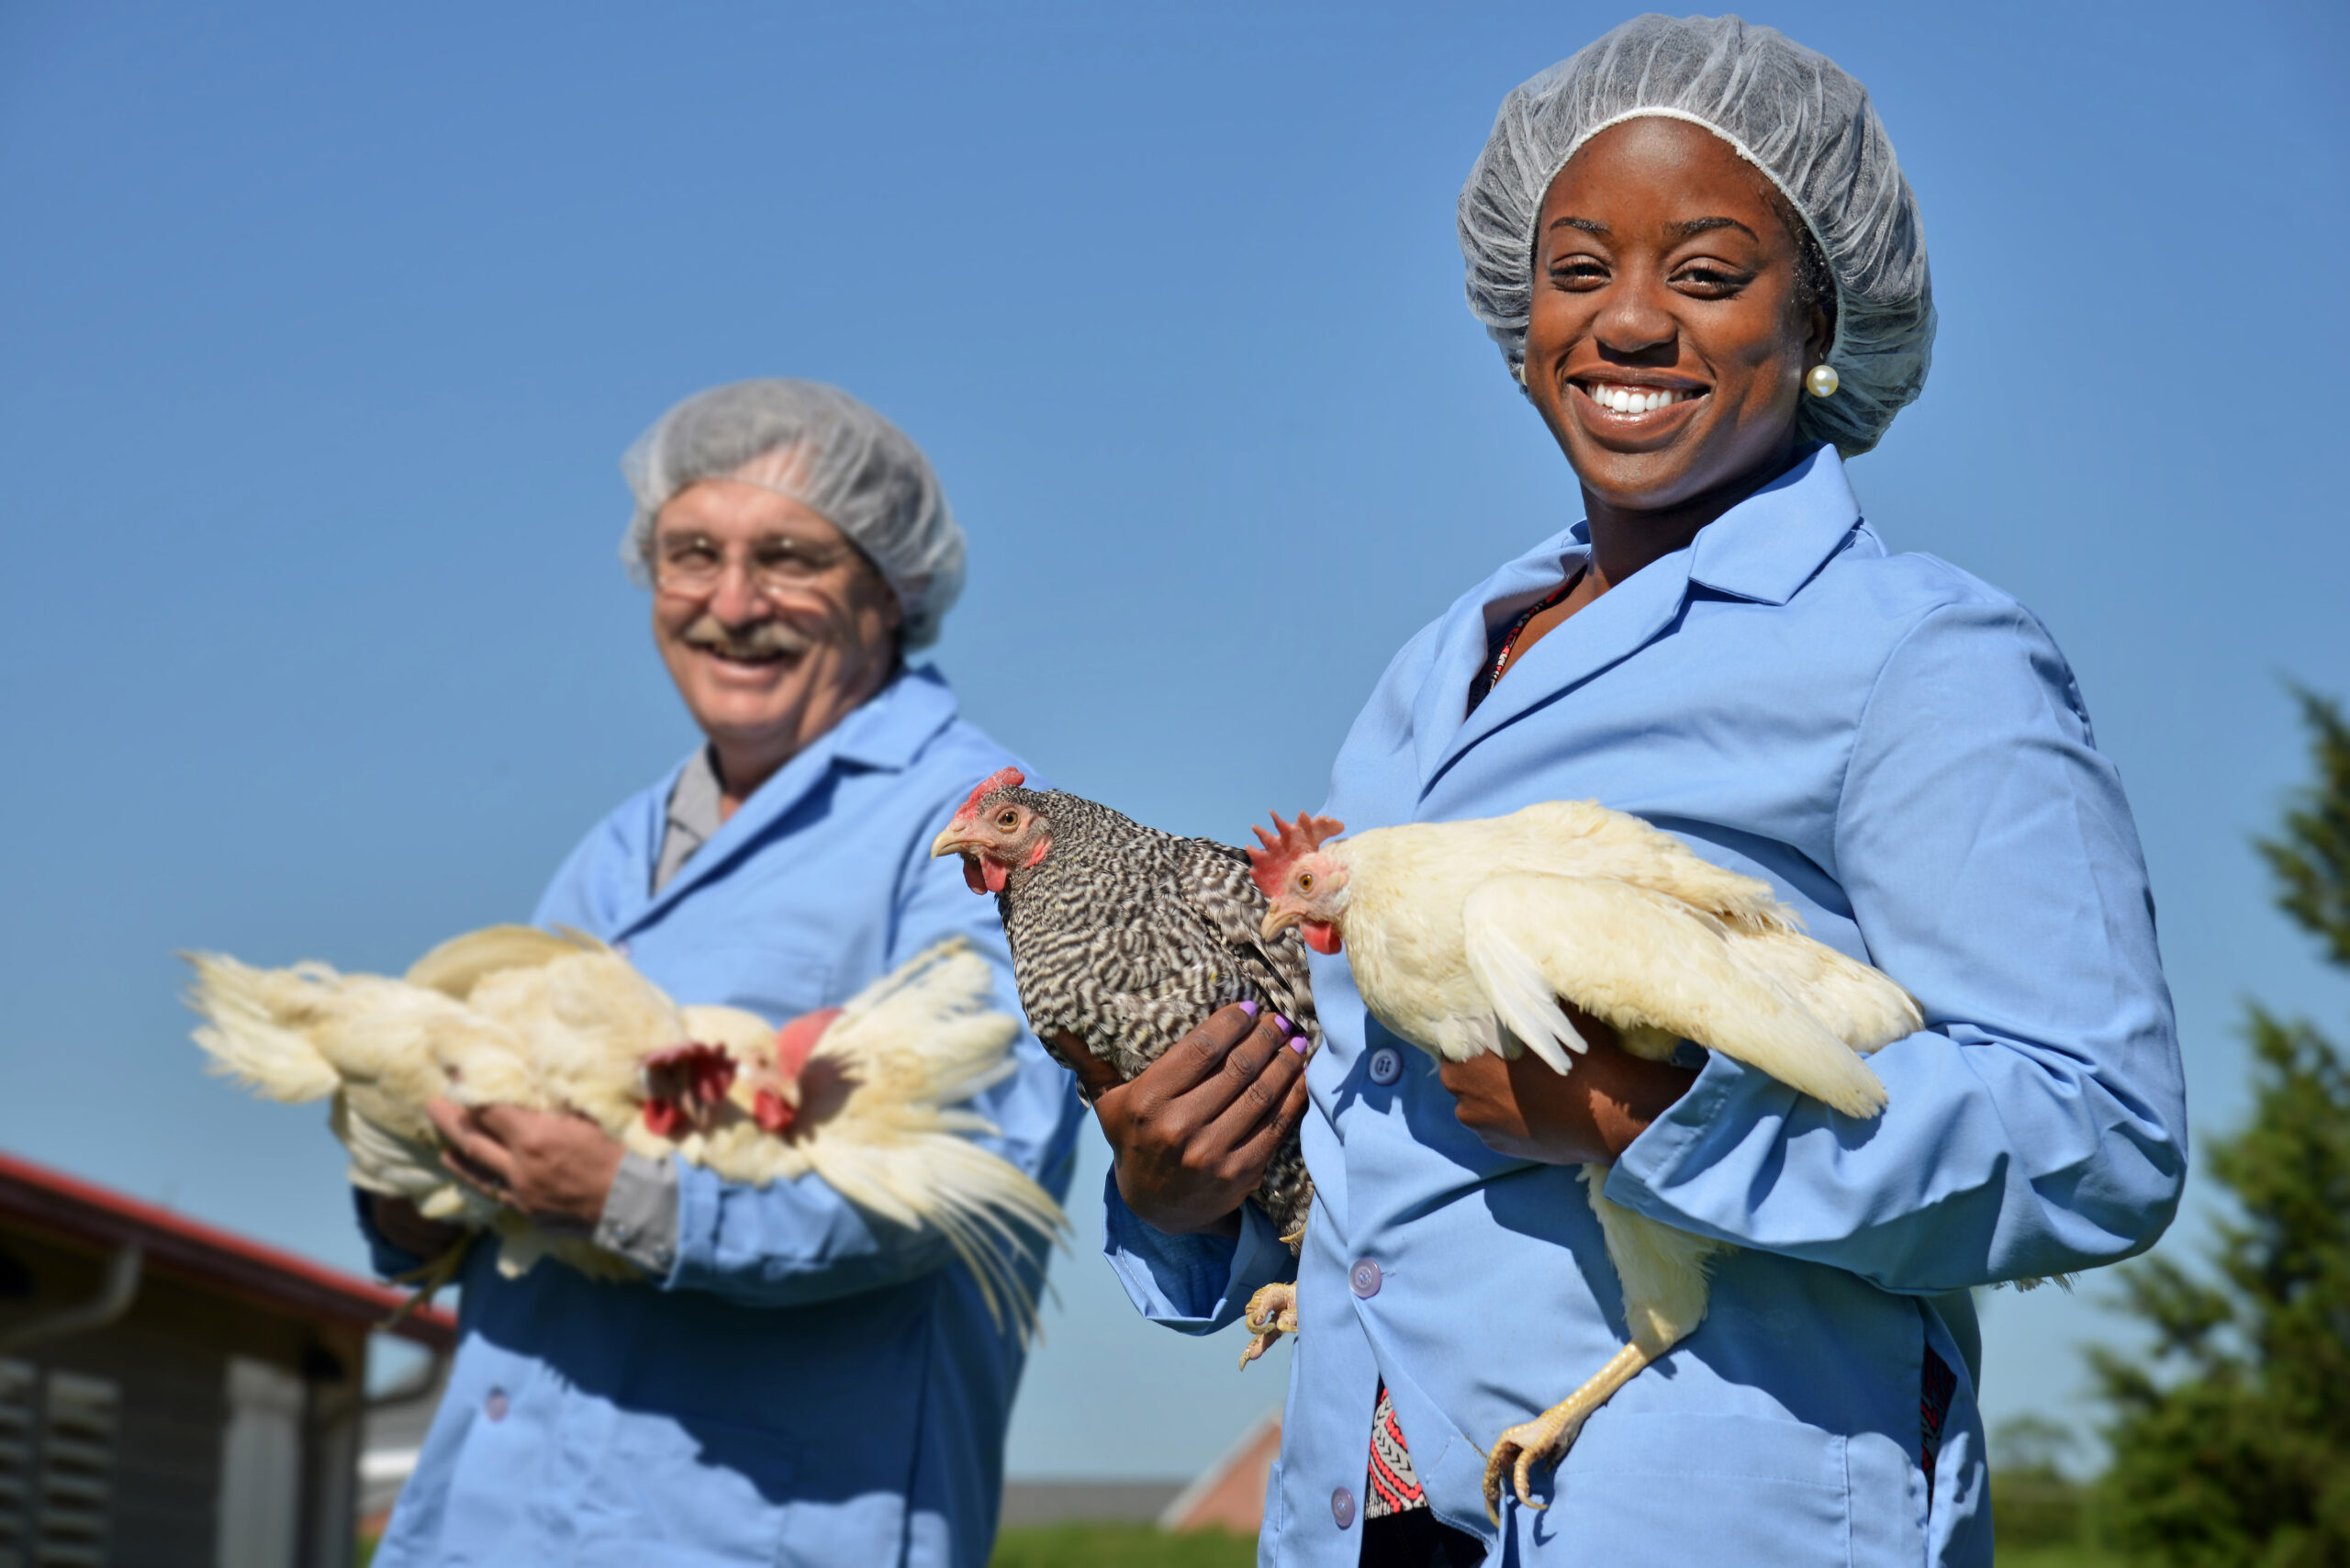 student and faculty holding chickens